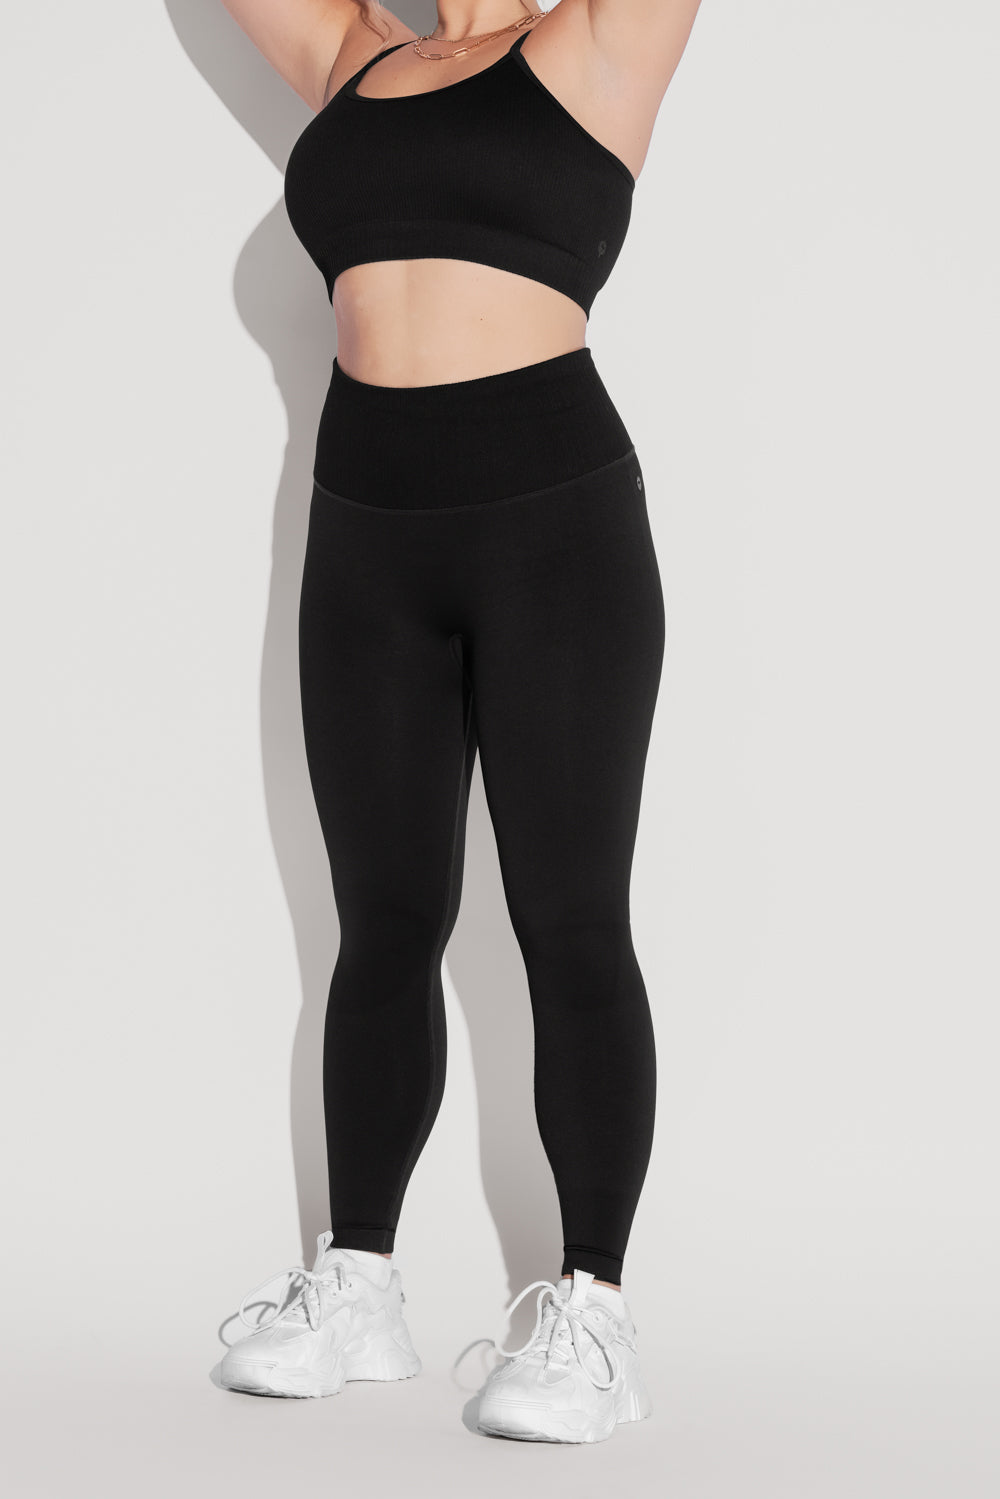 Supersculpt™ Leggings with Pockets - Forestwood - 3X / 25